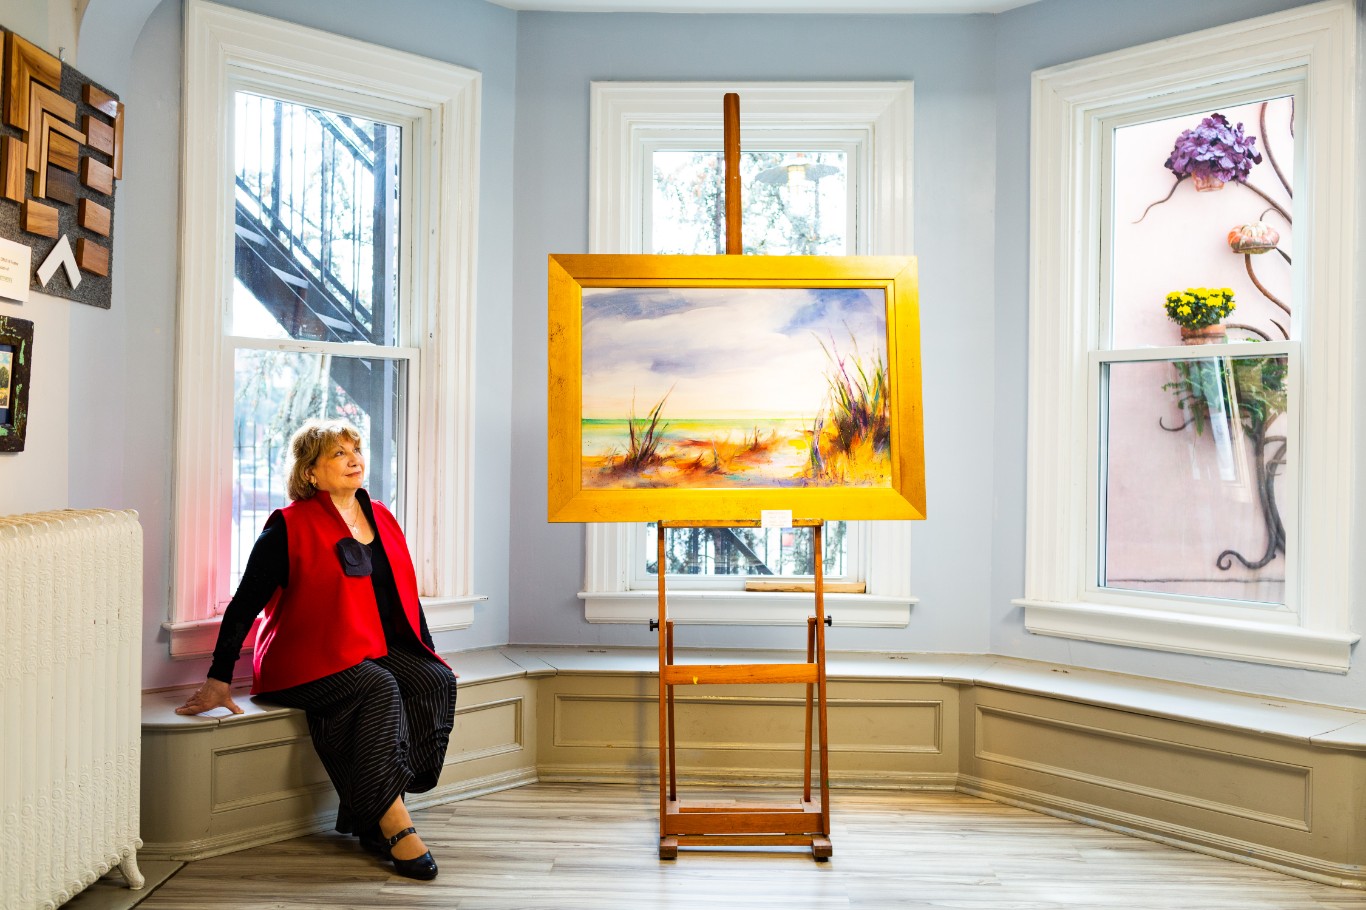 A senior woman sitting on a bench in front of a painting in a continuing care community.